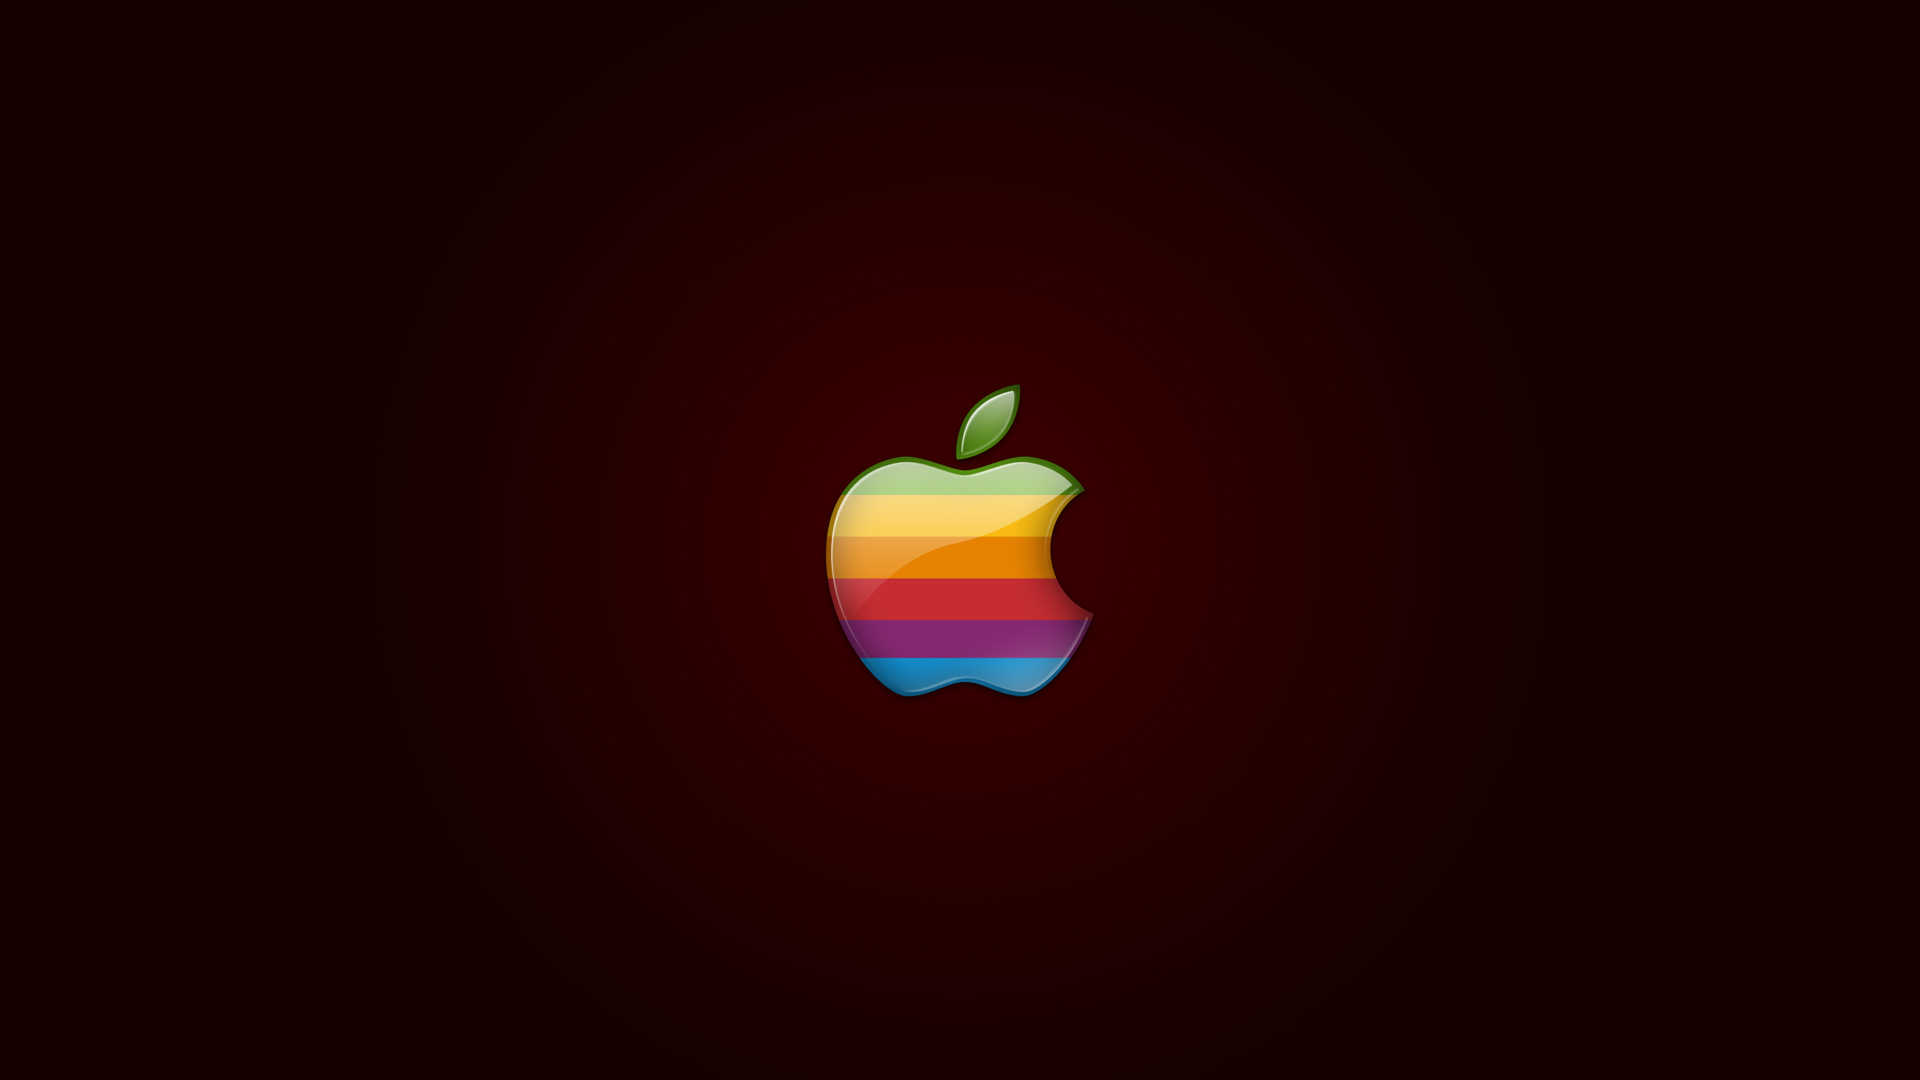 Some of you asked for a straighton version of this wallpaper 4K Retro  Apple Oscilloscope OC  rVintageApple